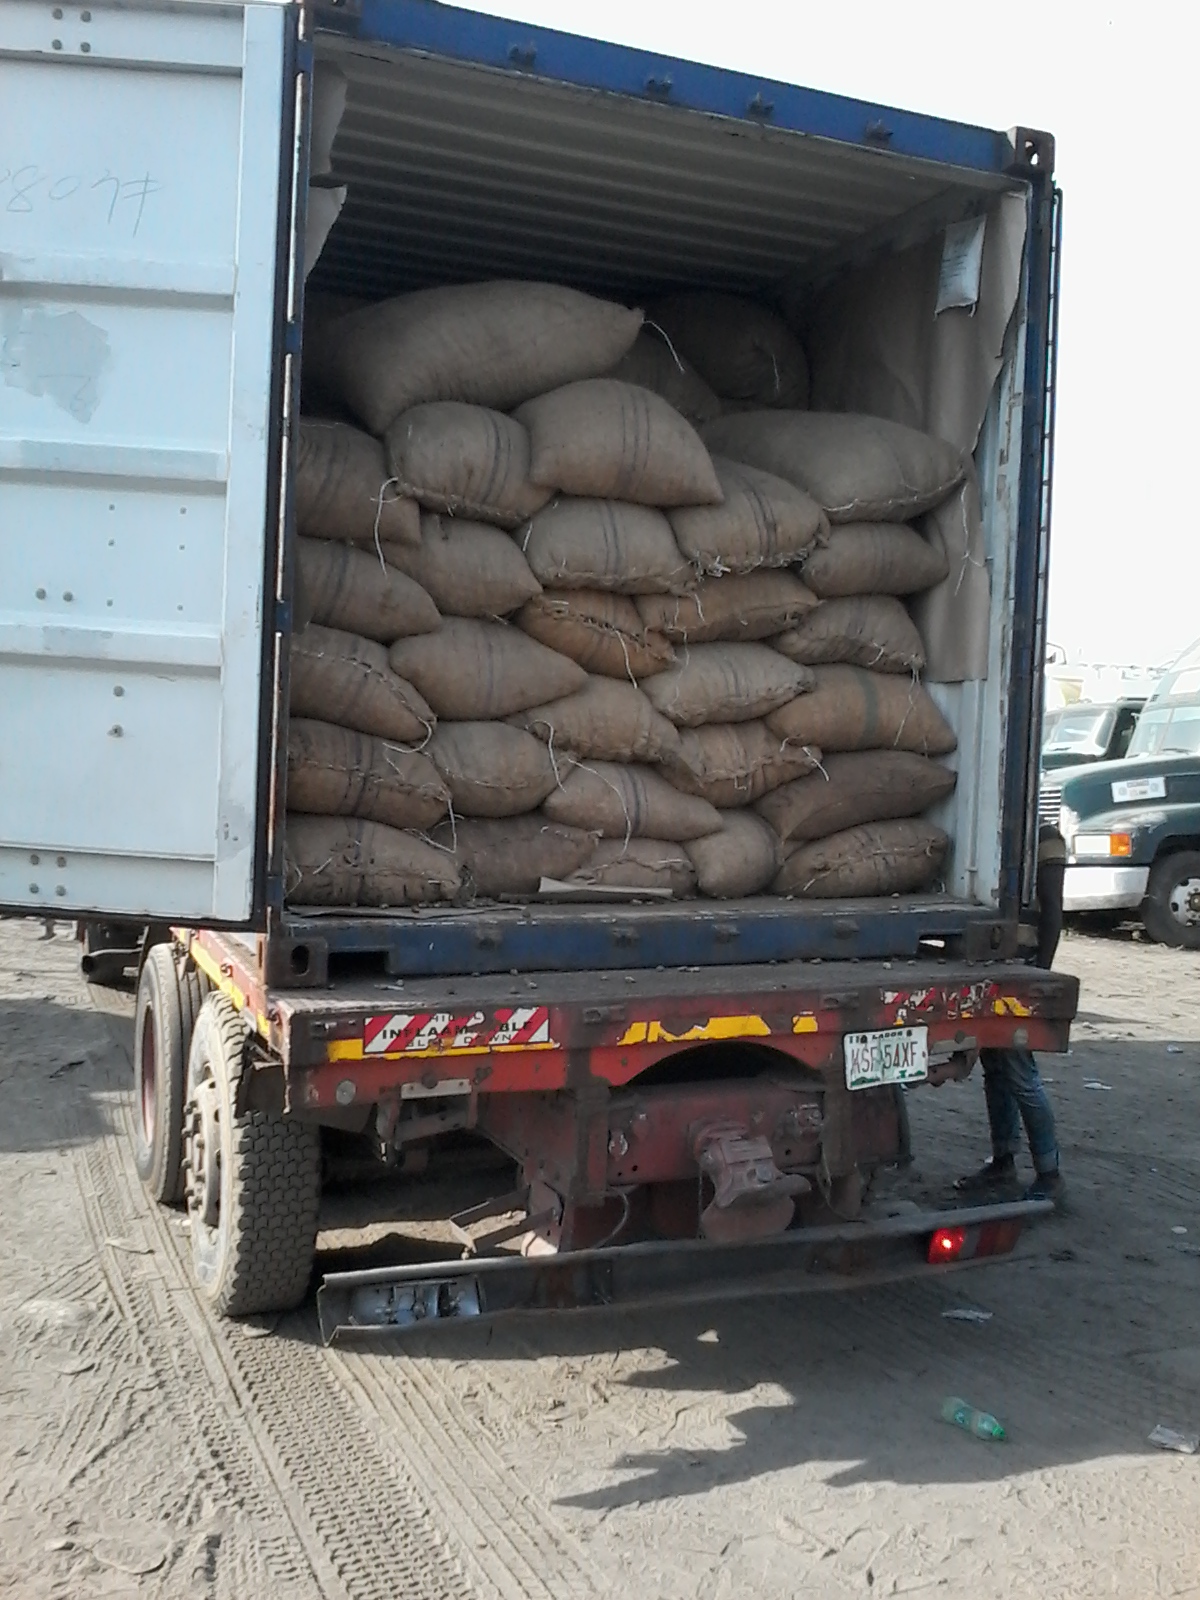 Bags of Cashew Nuts